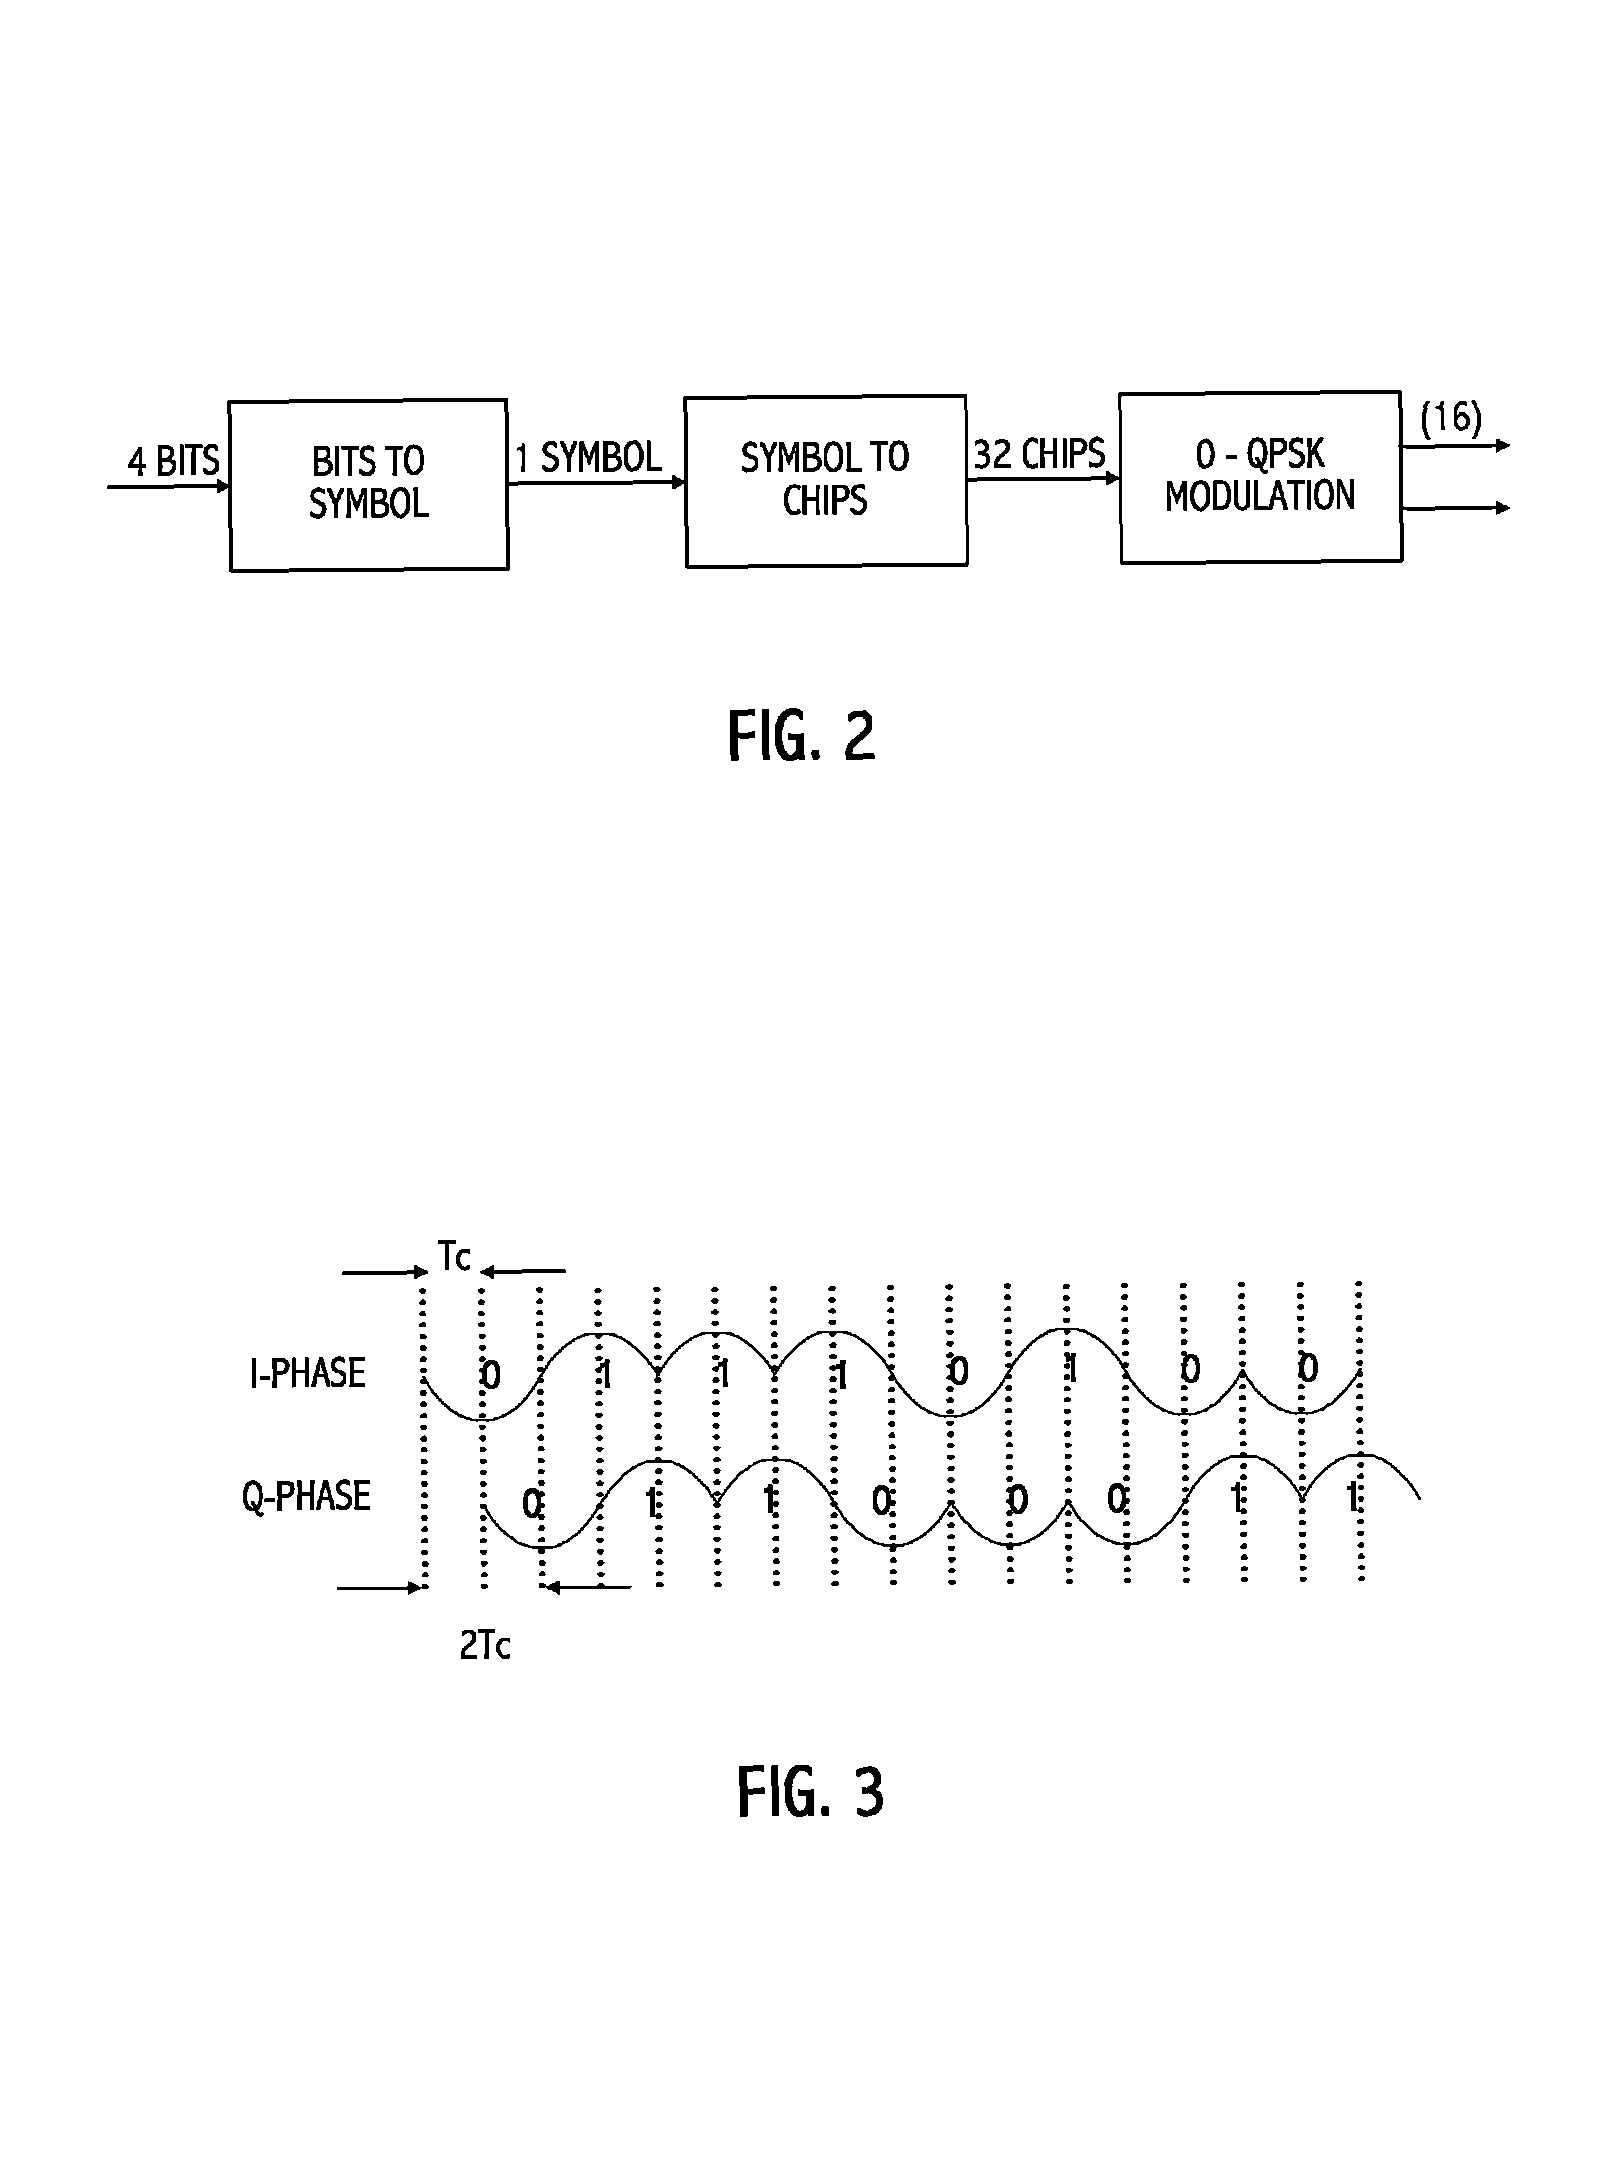 In-band interference rejection of signals in alternate and adjacent channels